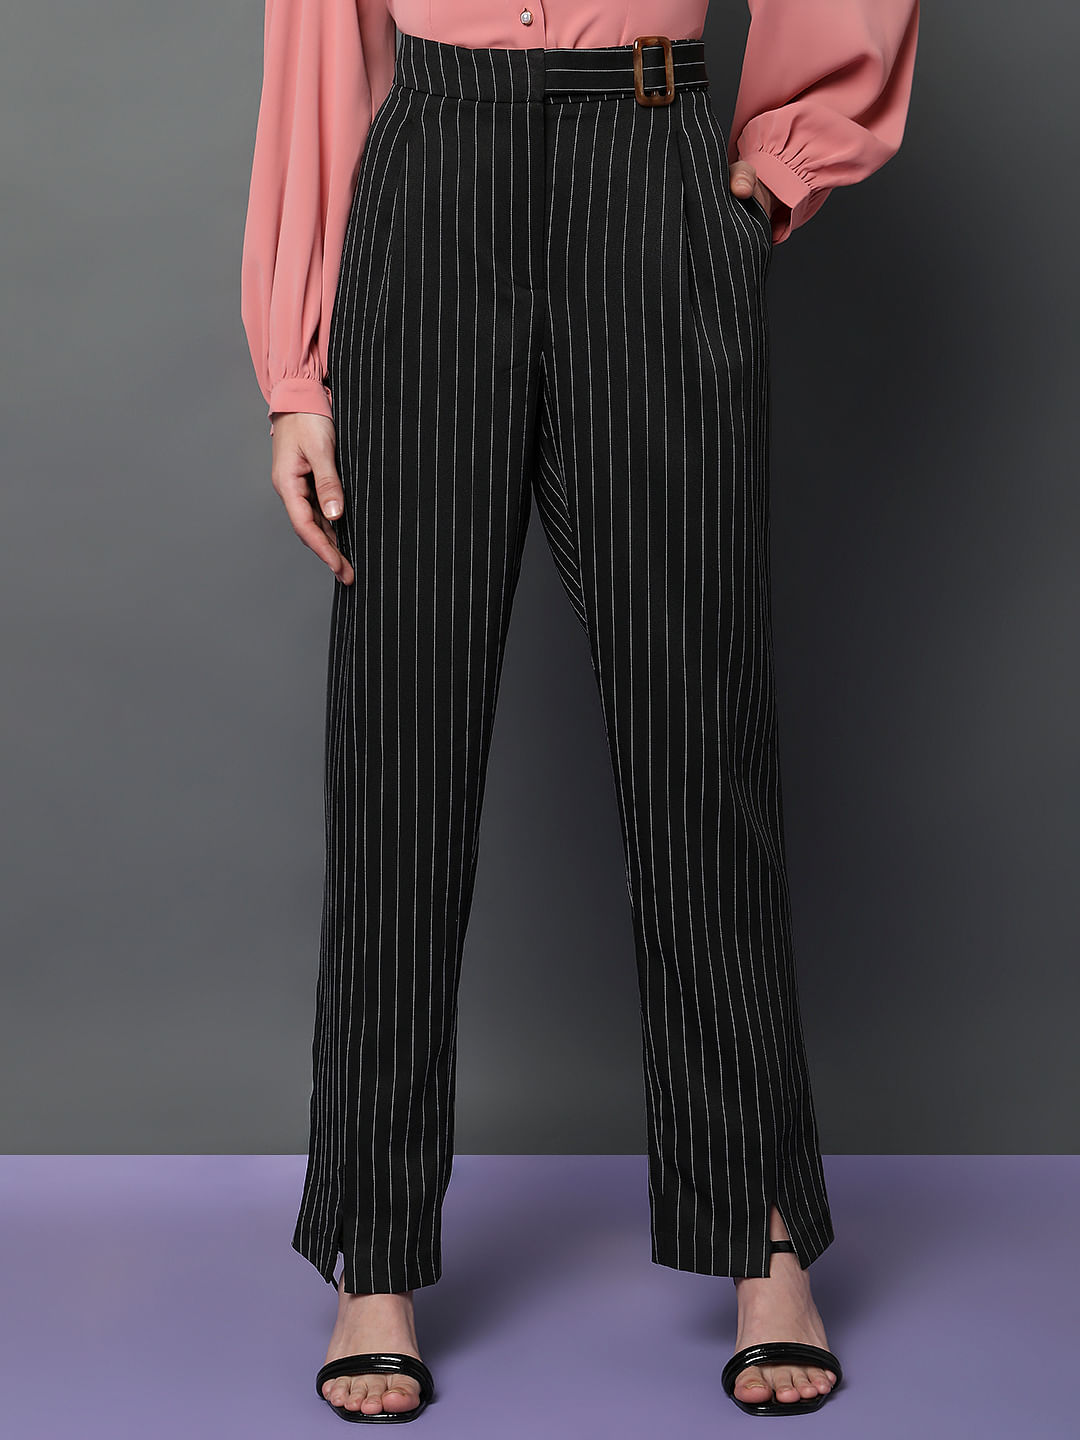 Here I Go Black and White Striped Pants FINAL SALE – Pink Lily